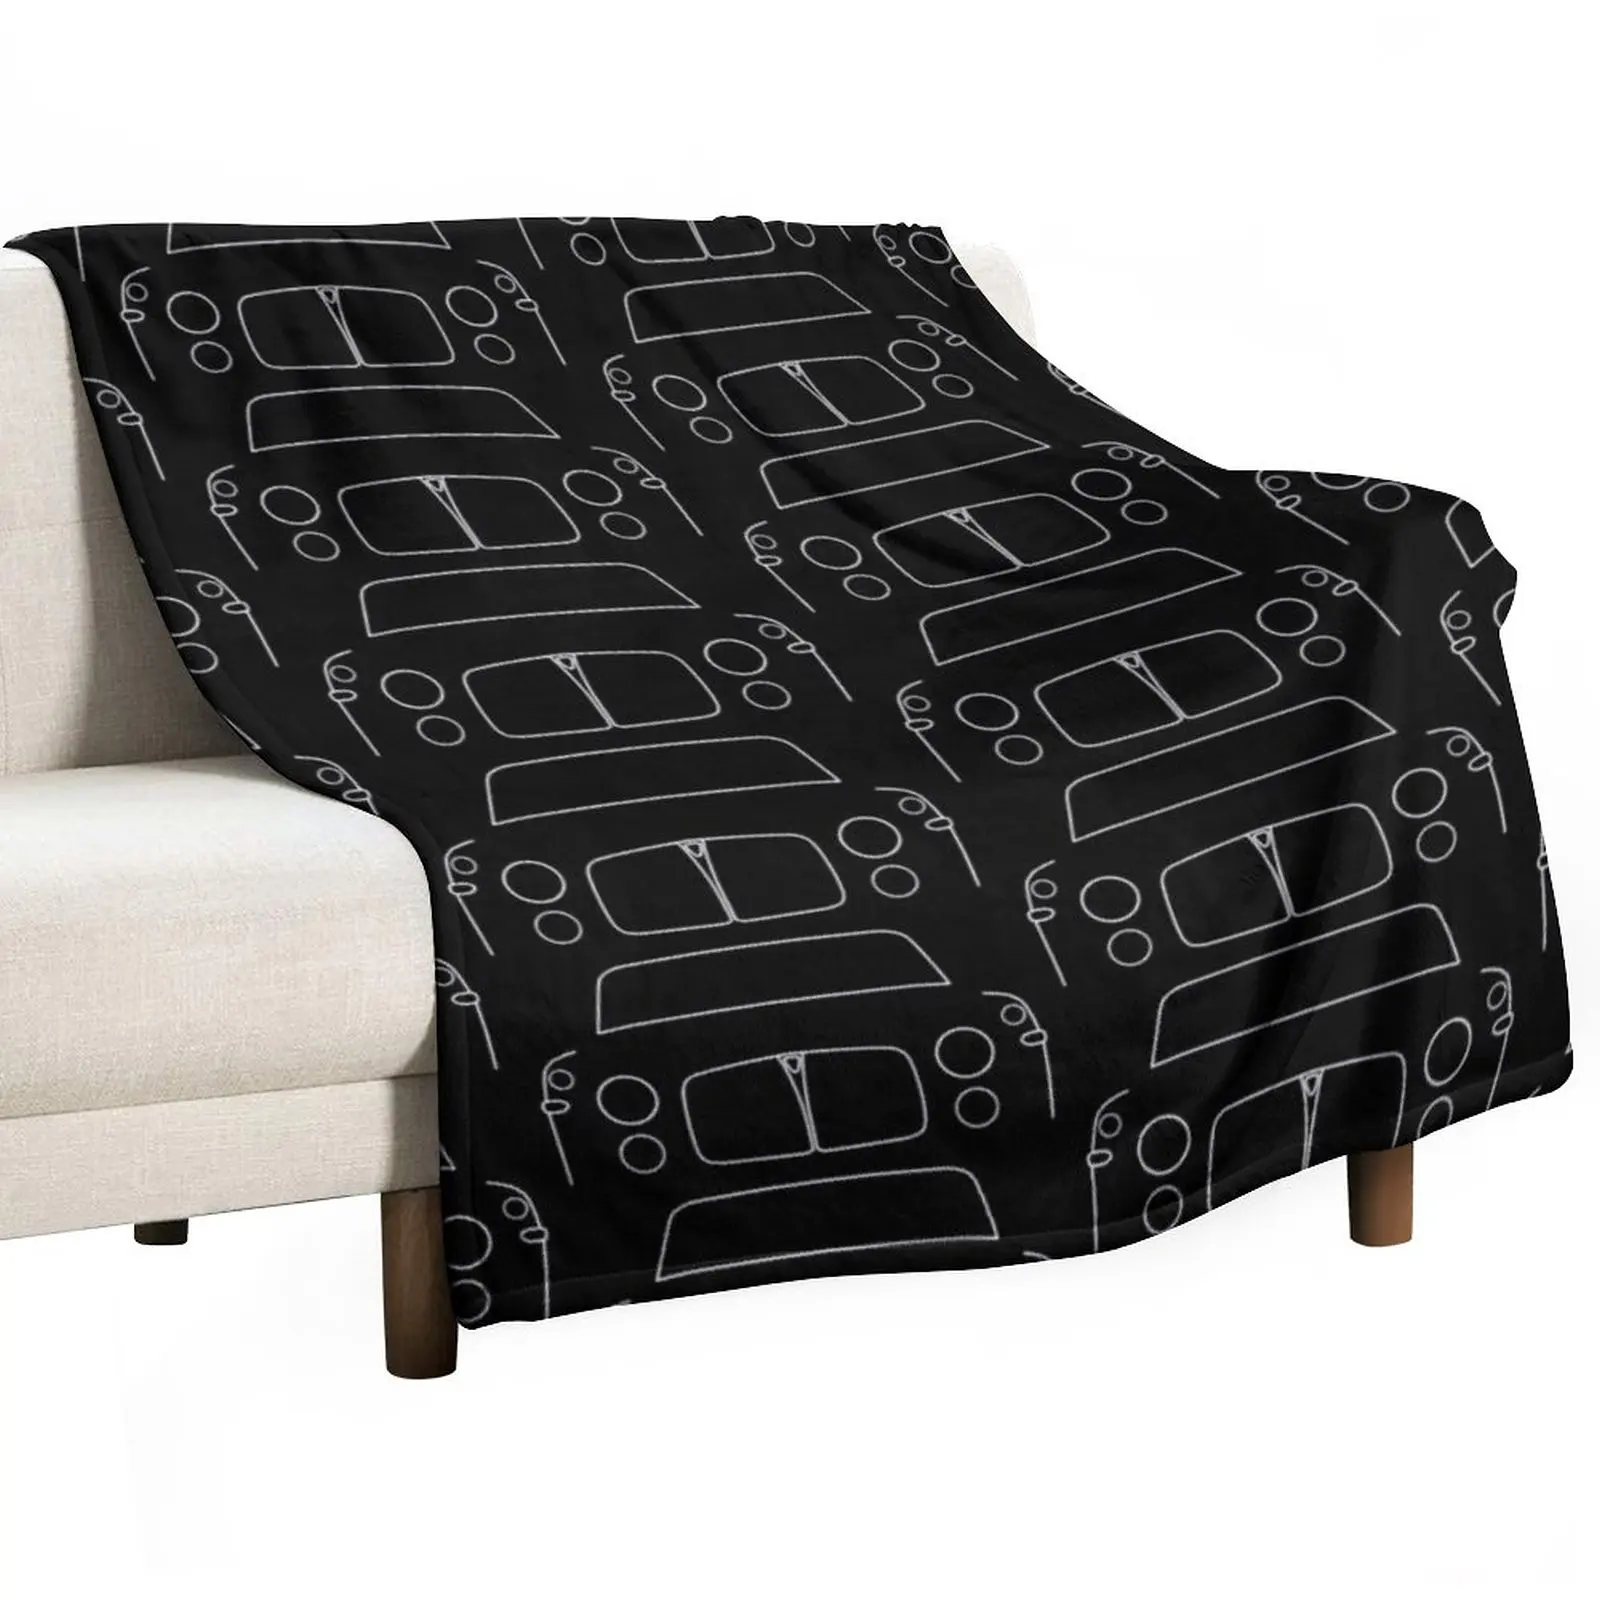 

Rover P5 classic car outline graphic (white) Throw Blanket Luxury Throw Blanket For Sofa Thin Soft Big Blanket